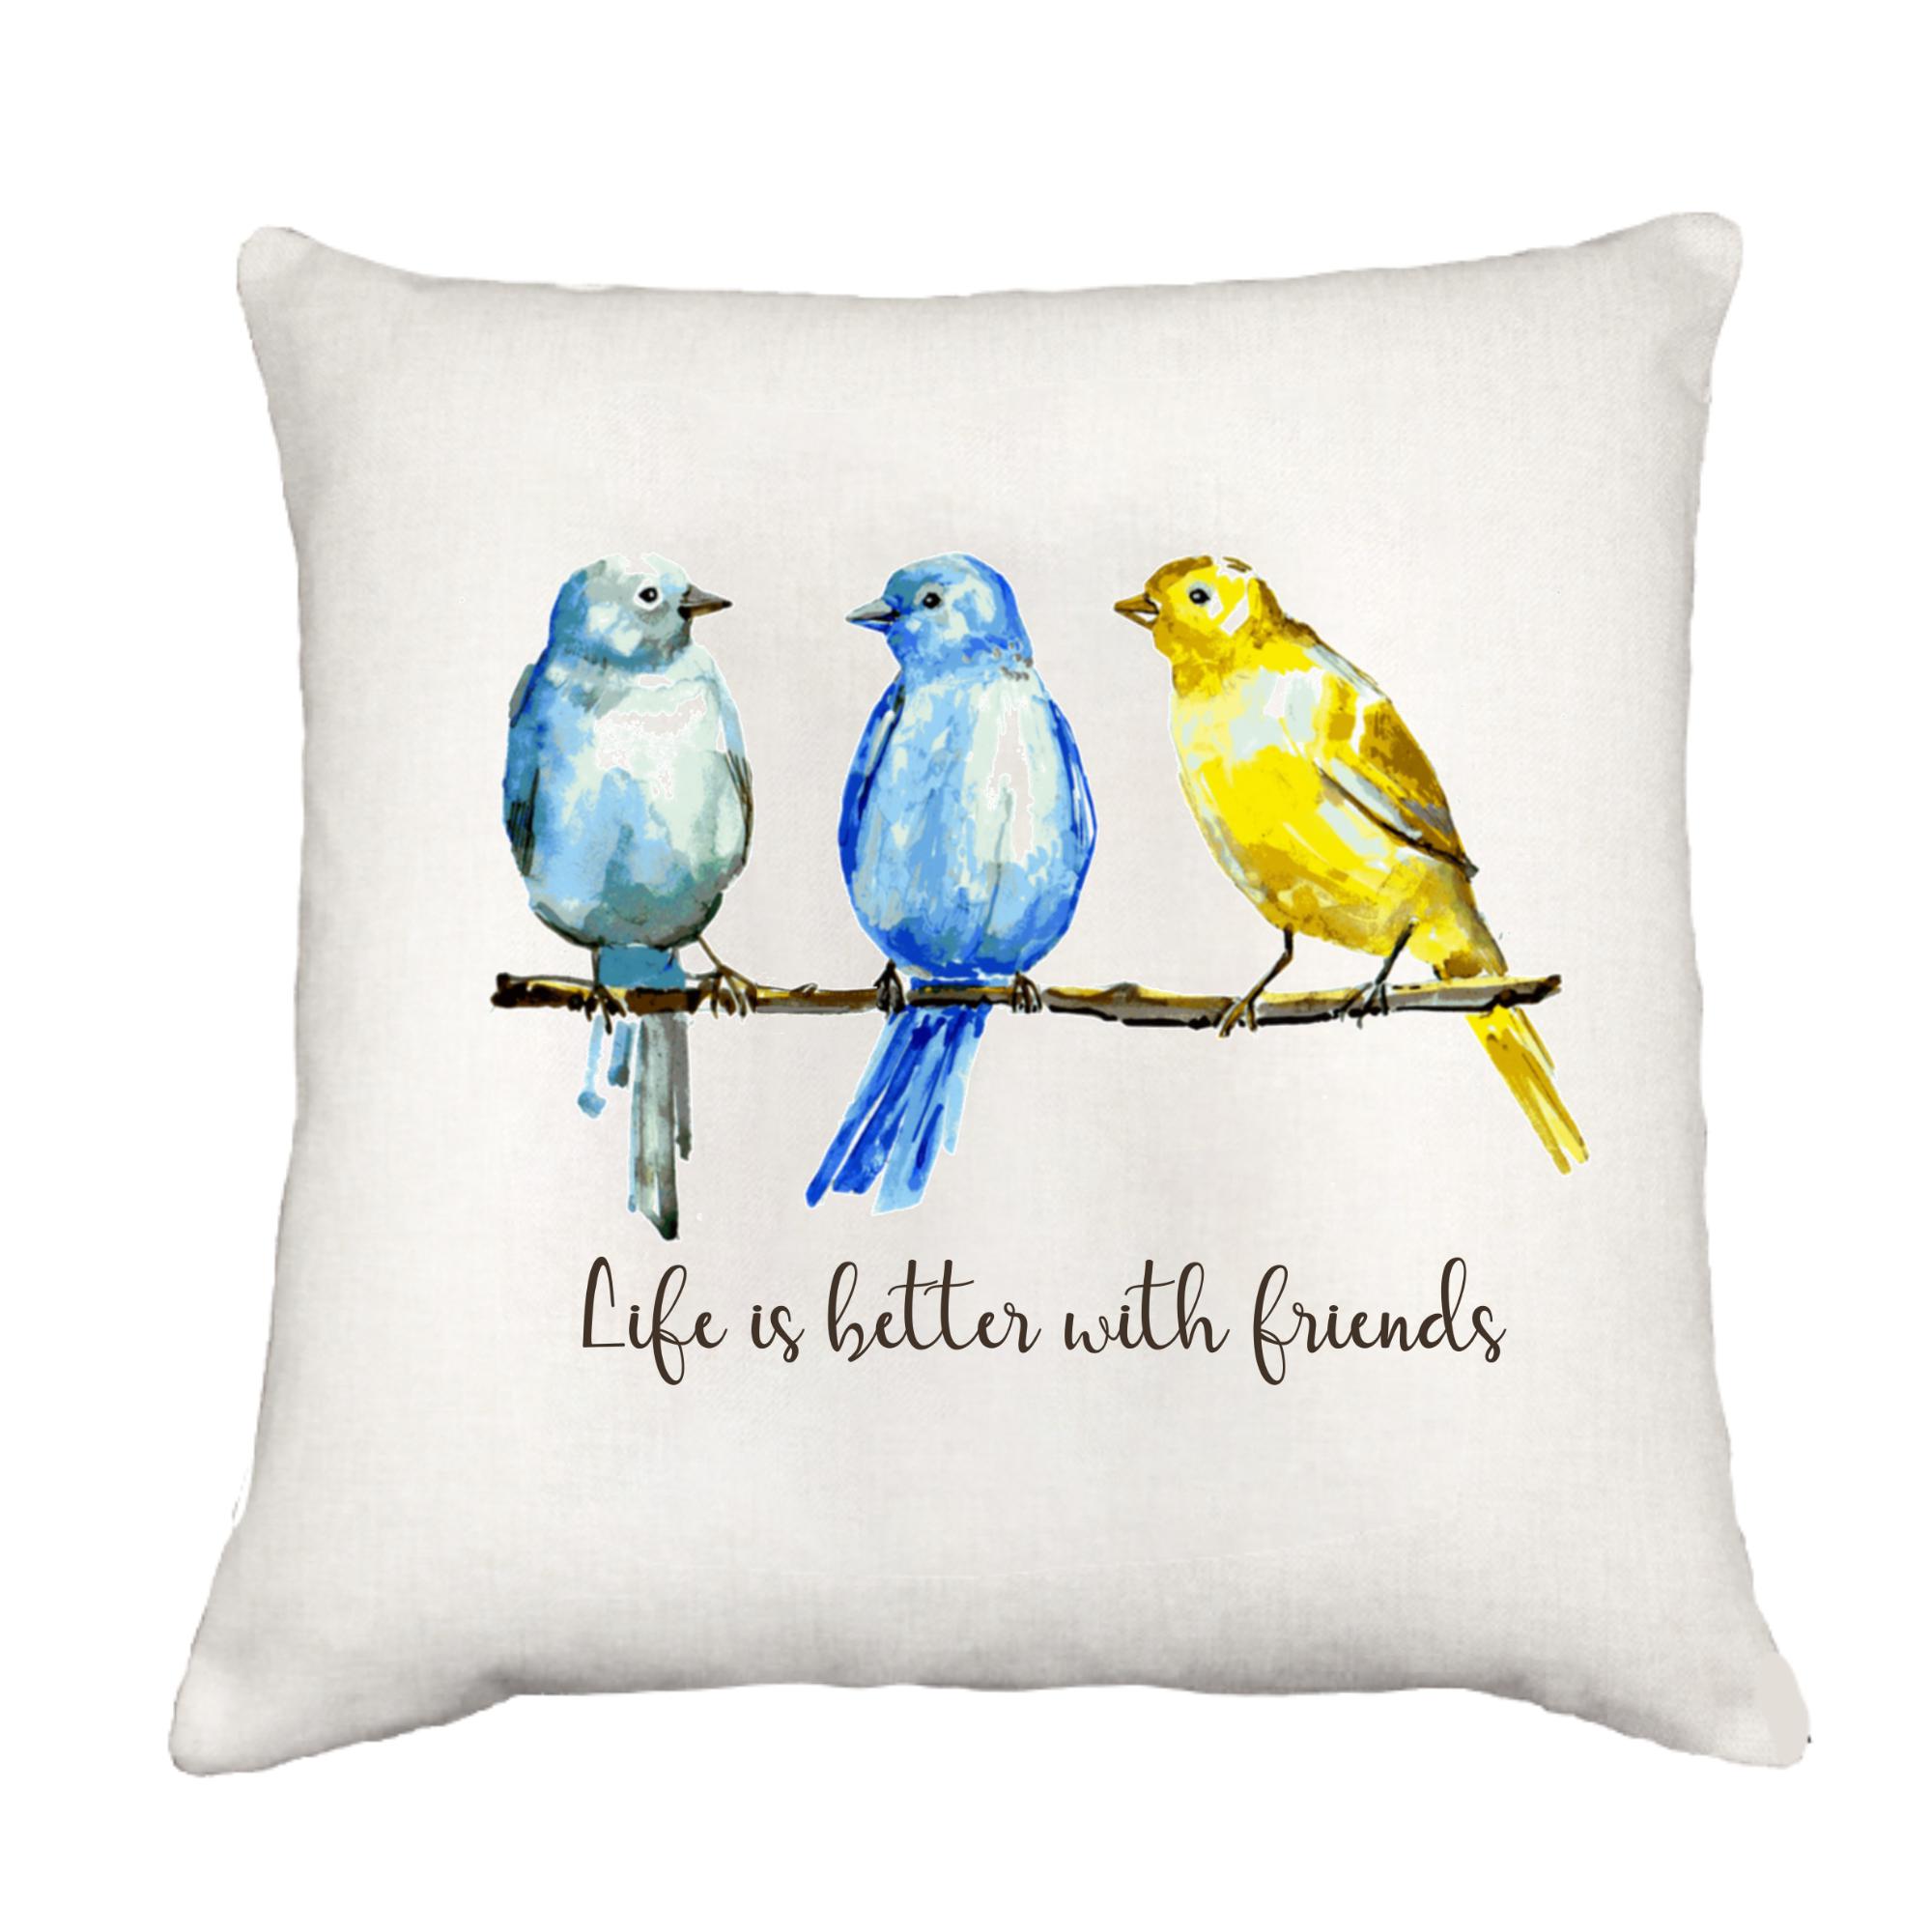 Life is Better with Friends Cottage Pillow Throw/Decorative Pillow - Southern Sisters